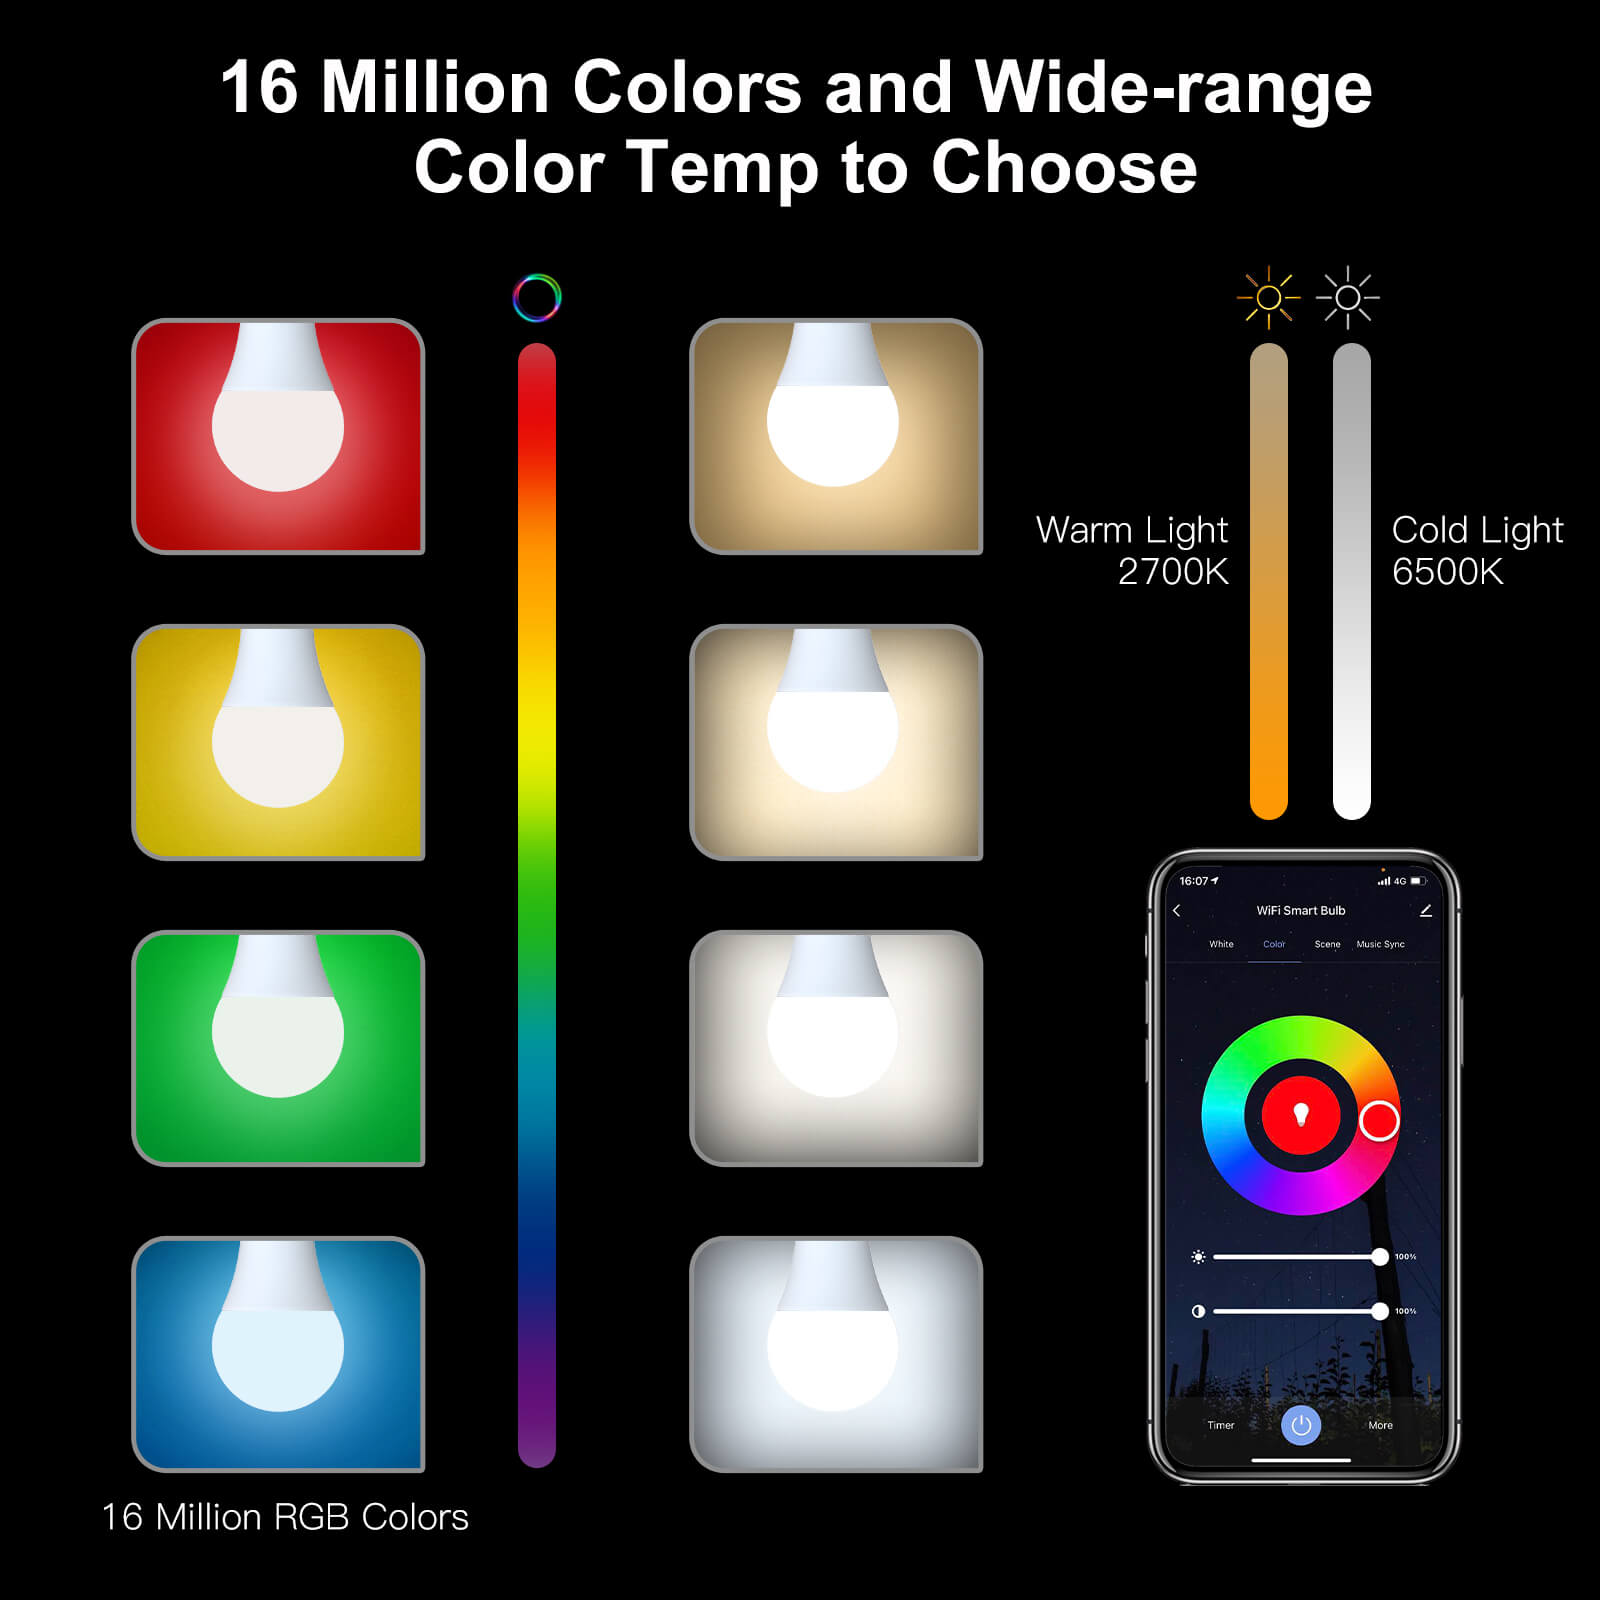 MOES WiFi Smart LED Light Bulb Dimmable Lamp 14W RGB E27 Color Changeable 2700K-6500K - MOES